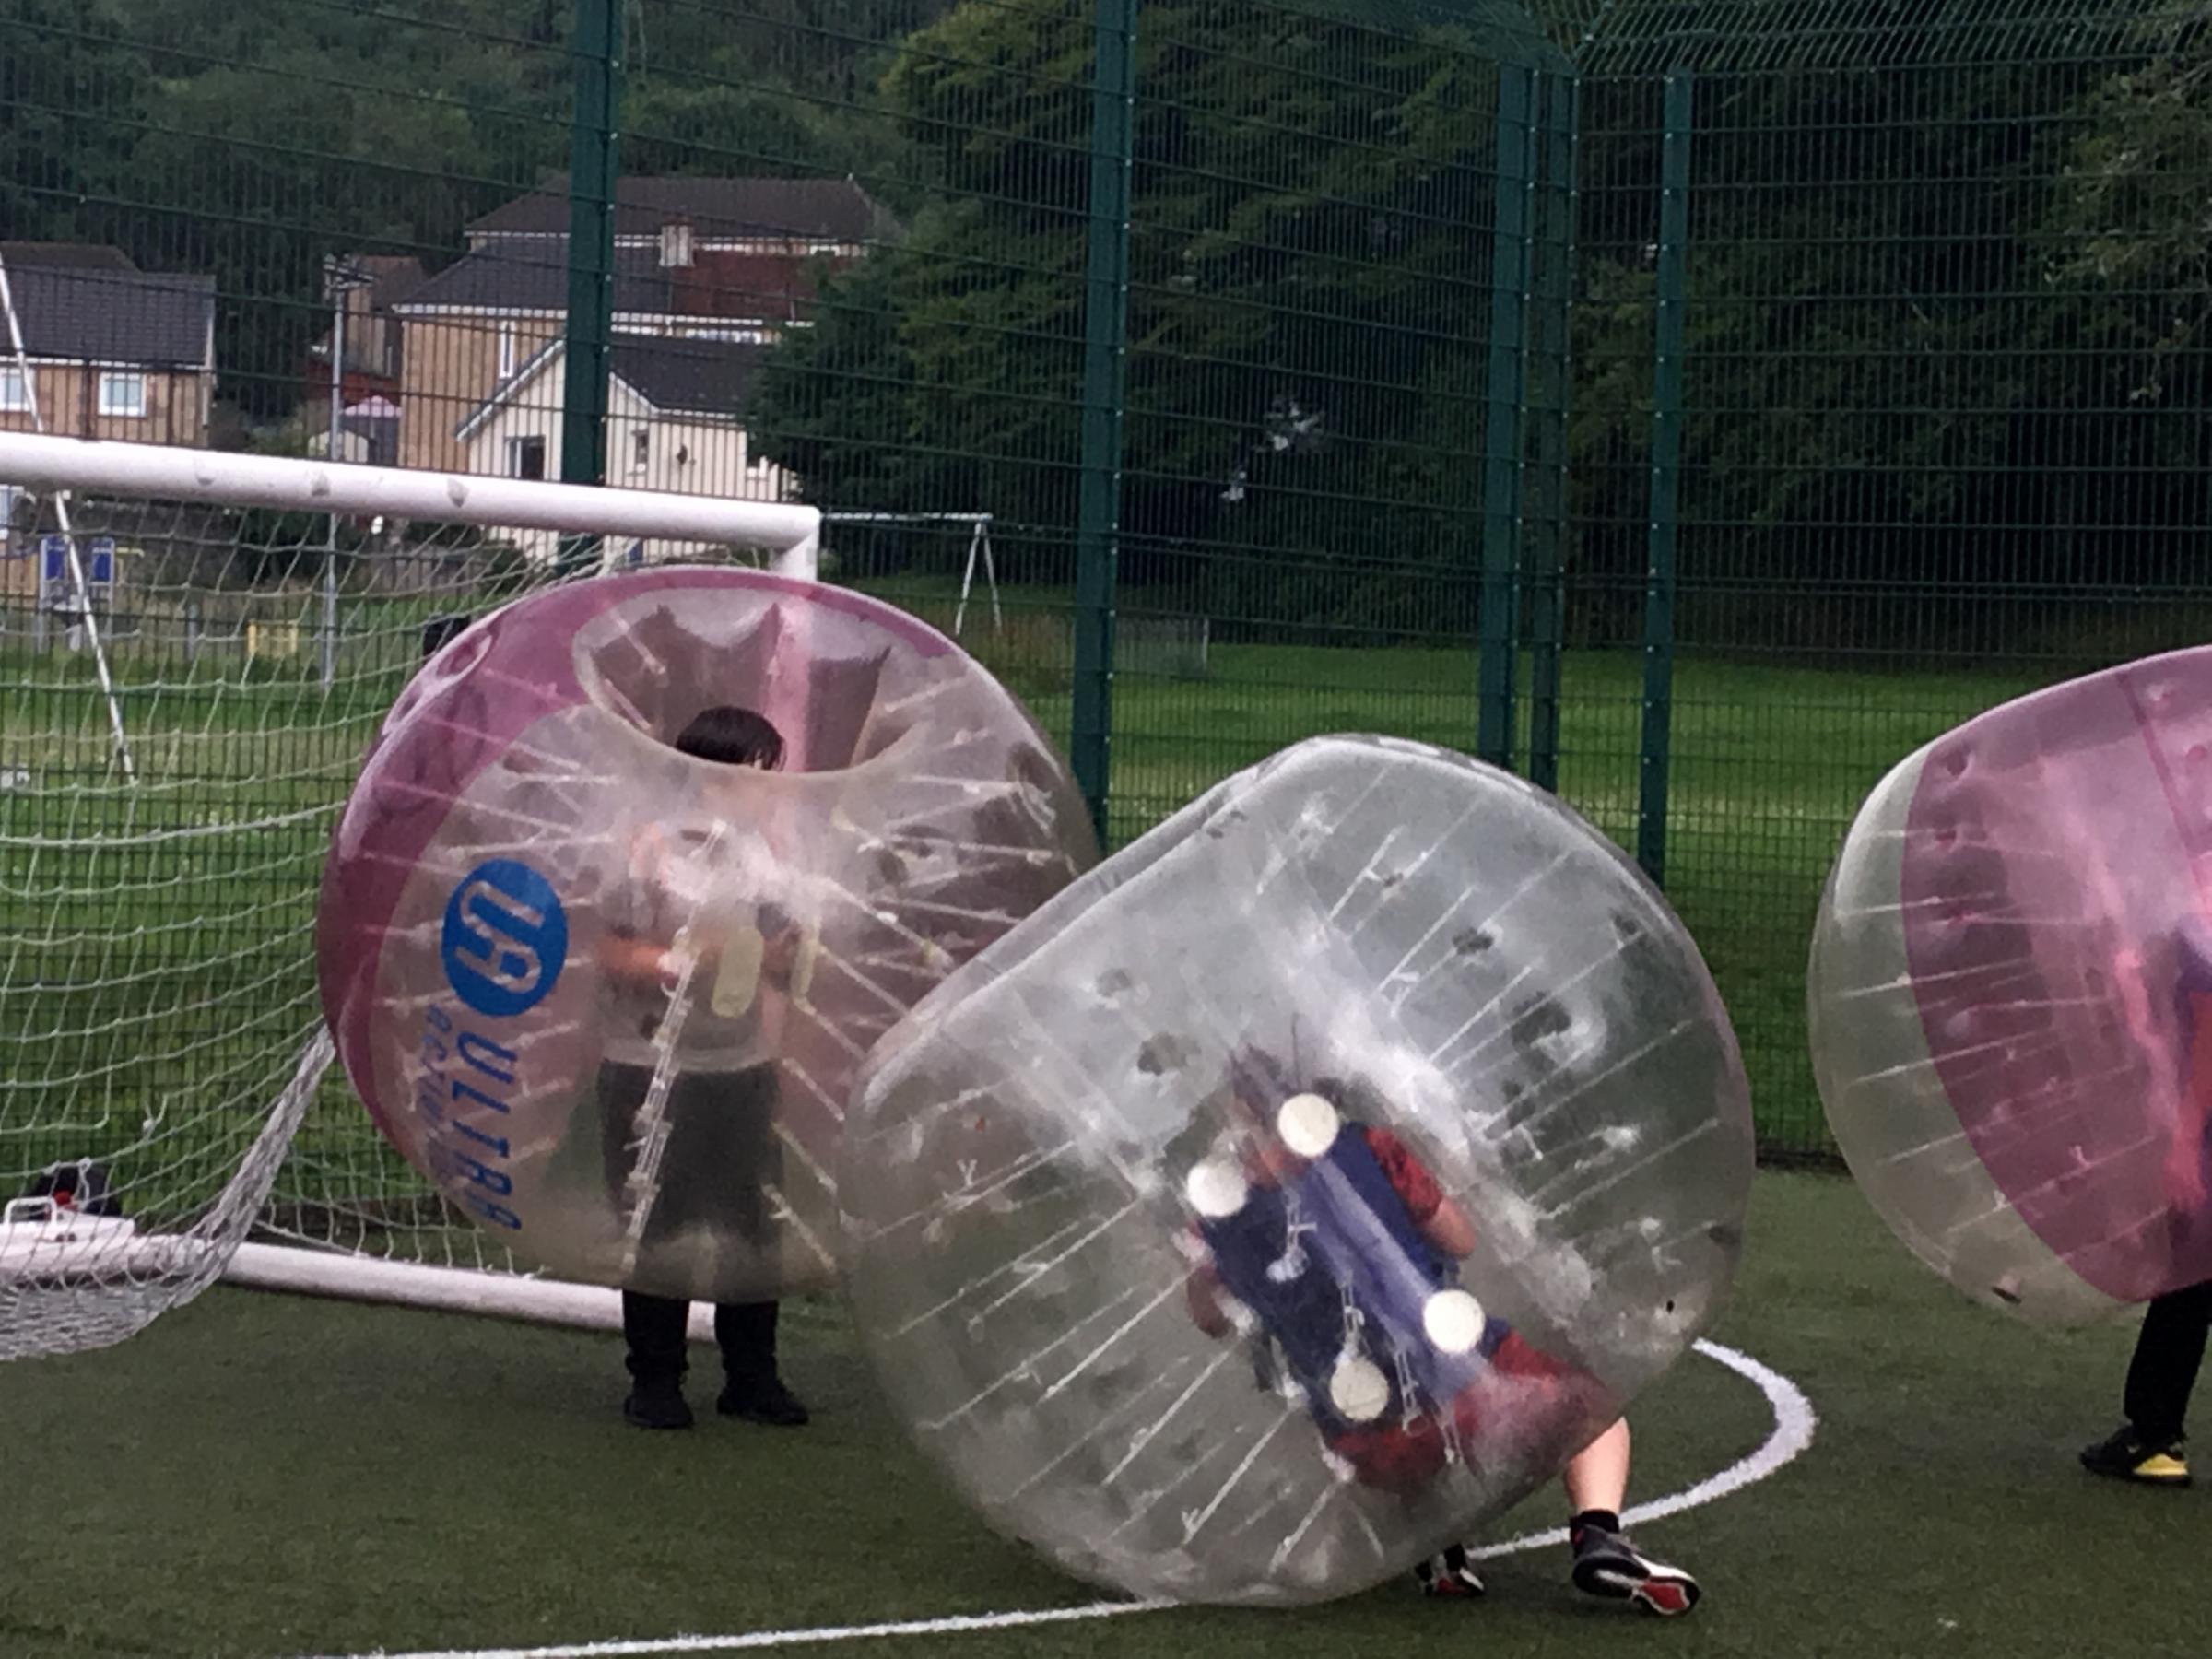 Game on for the bubble footballers